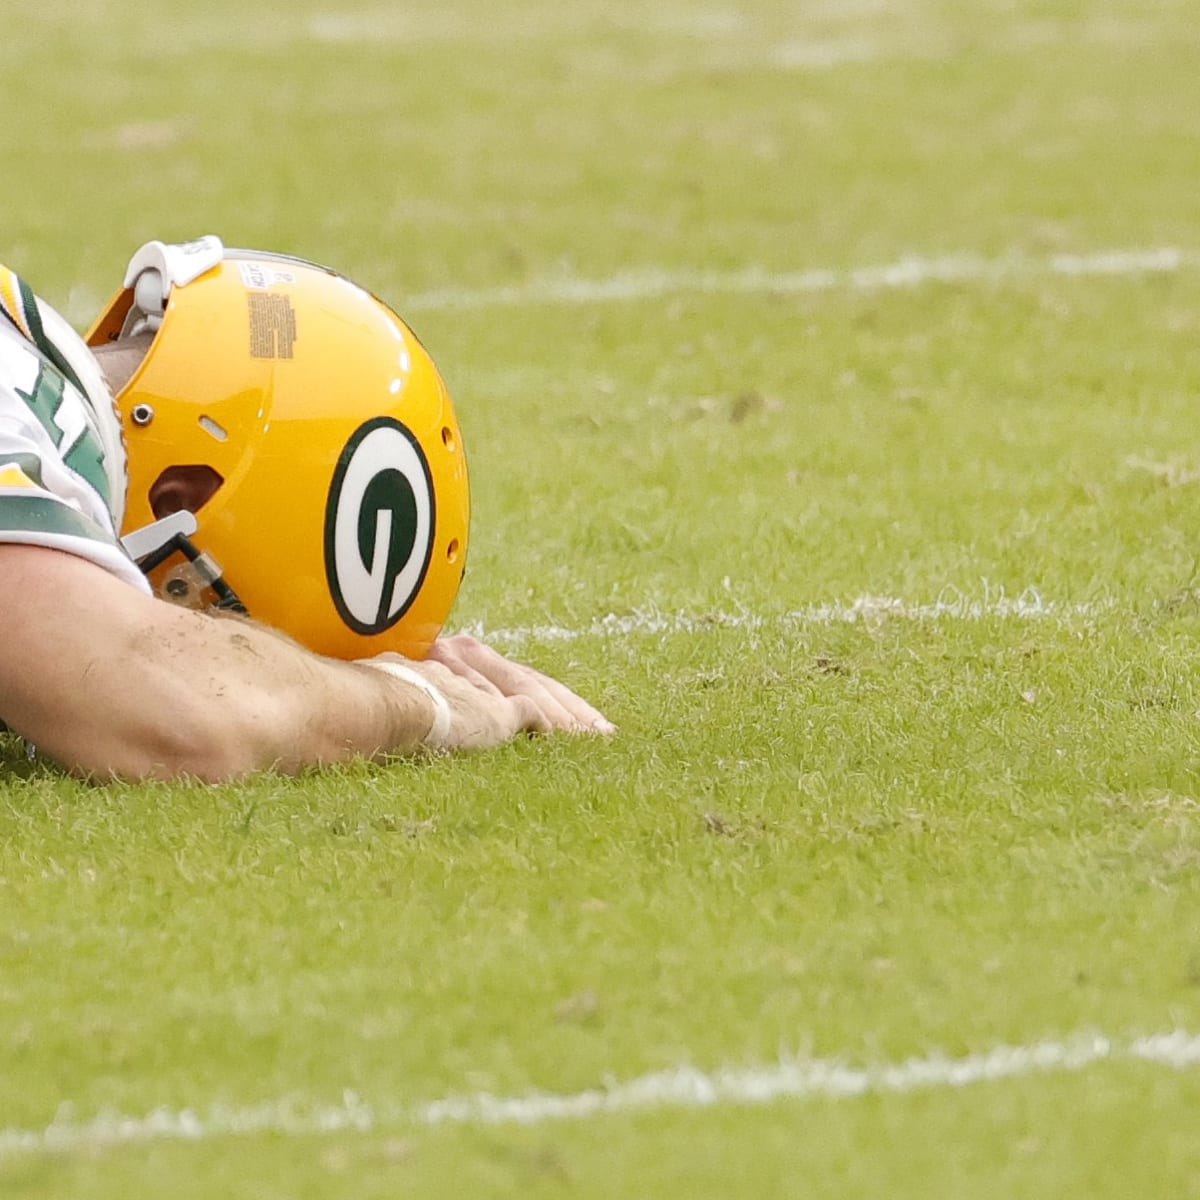 The last play of Packers-Commanders summed up a stinky NFL Sunday